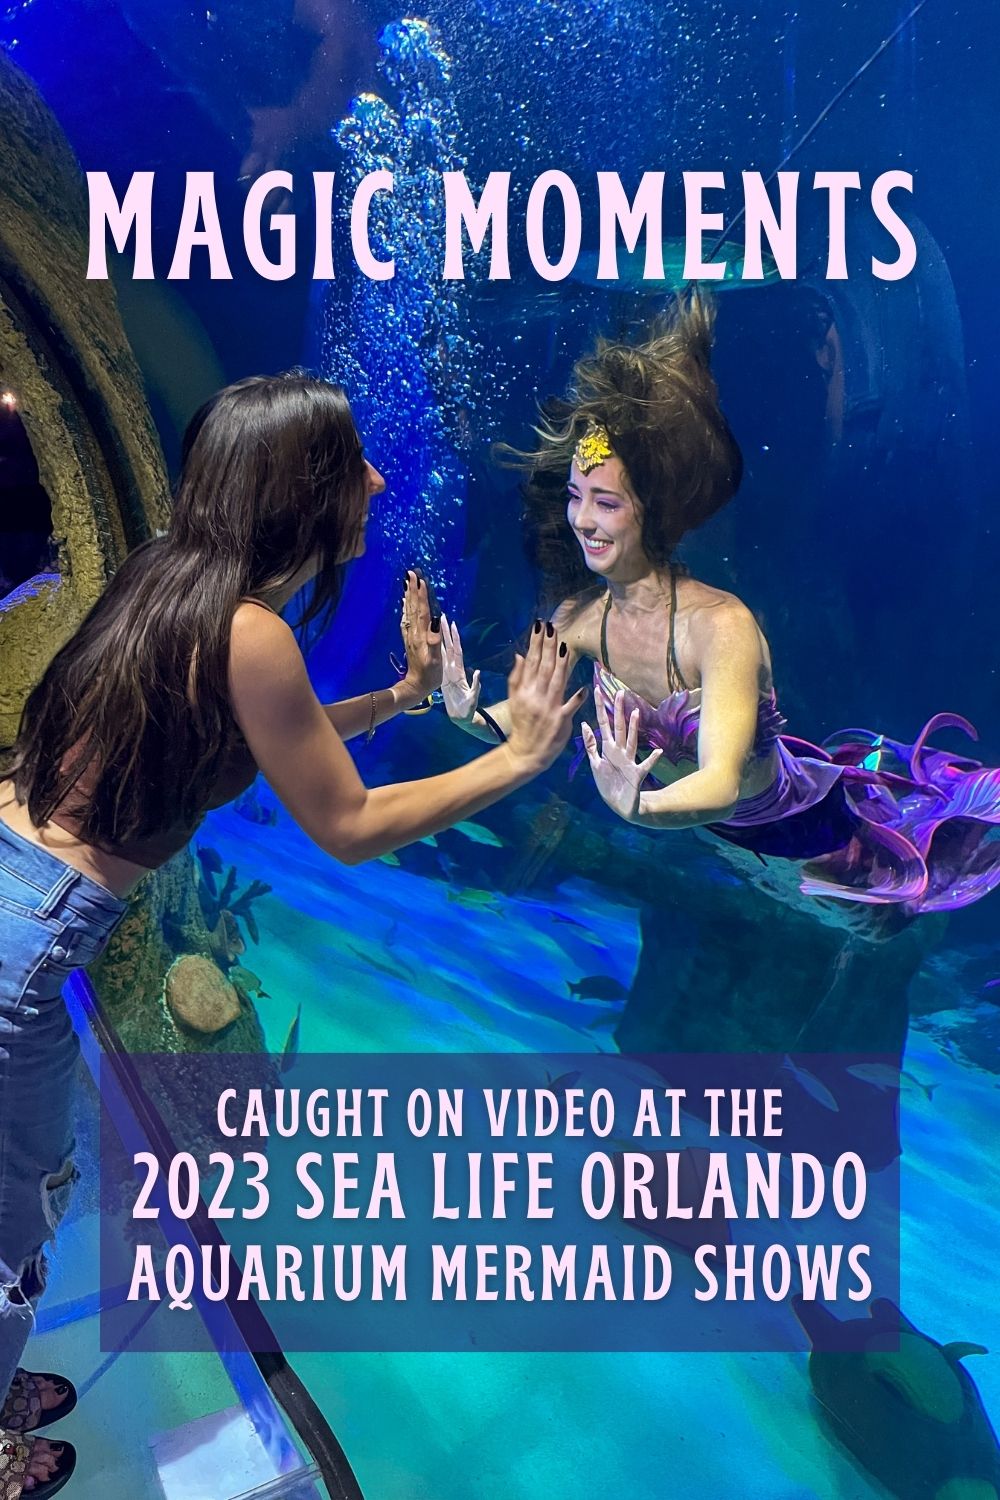 Videos of SEA LIFE Orlando's Aquarium Mermaid Shows that will make you wish you were there!